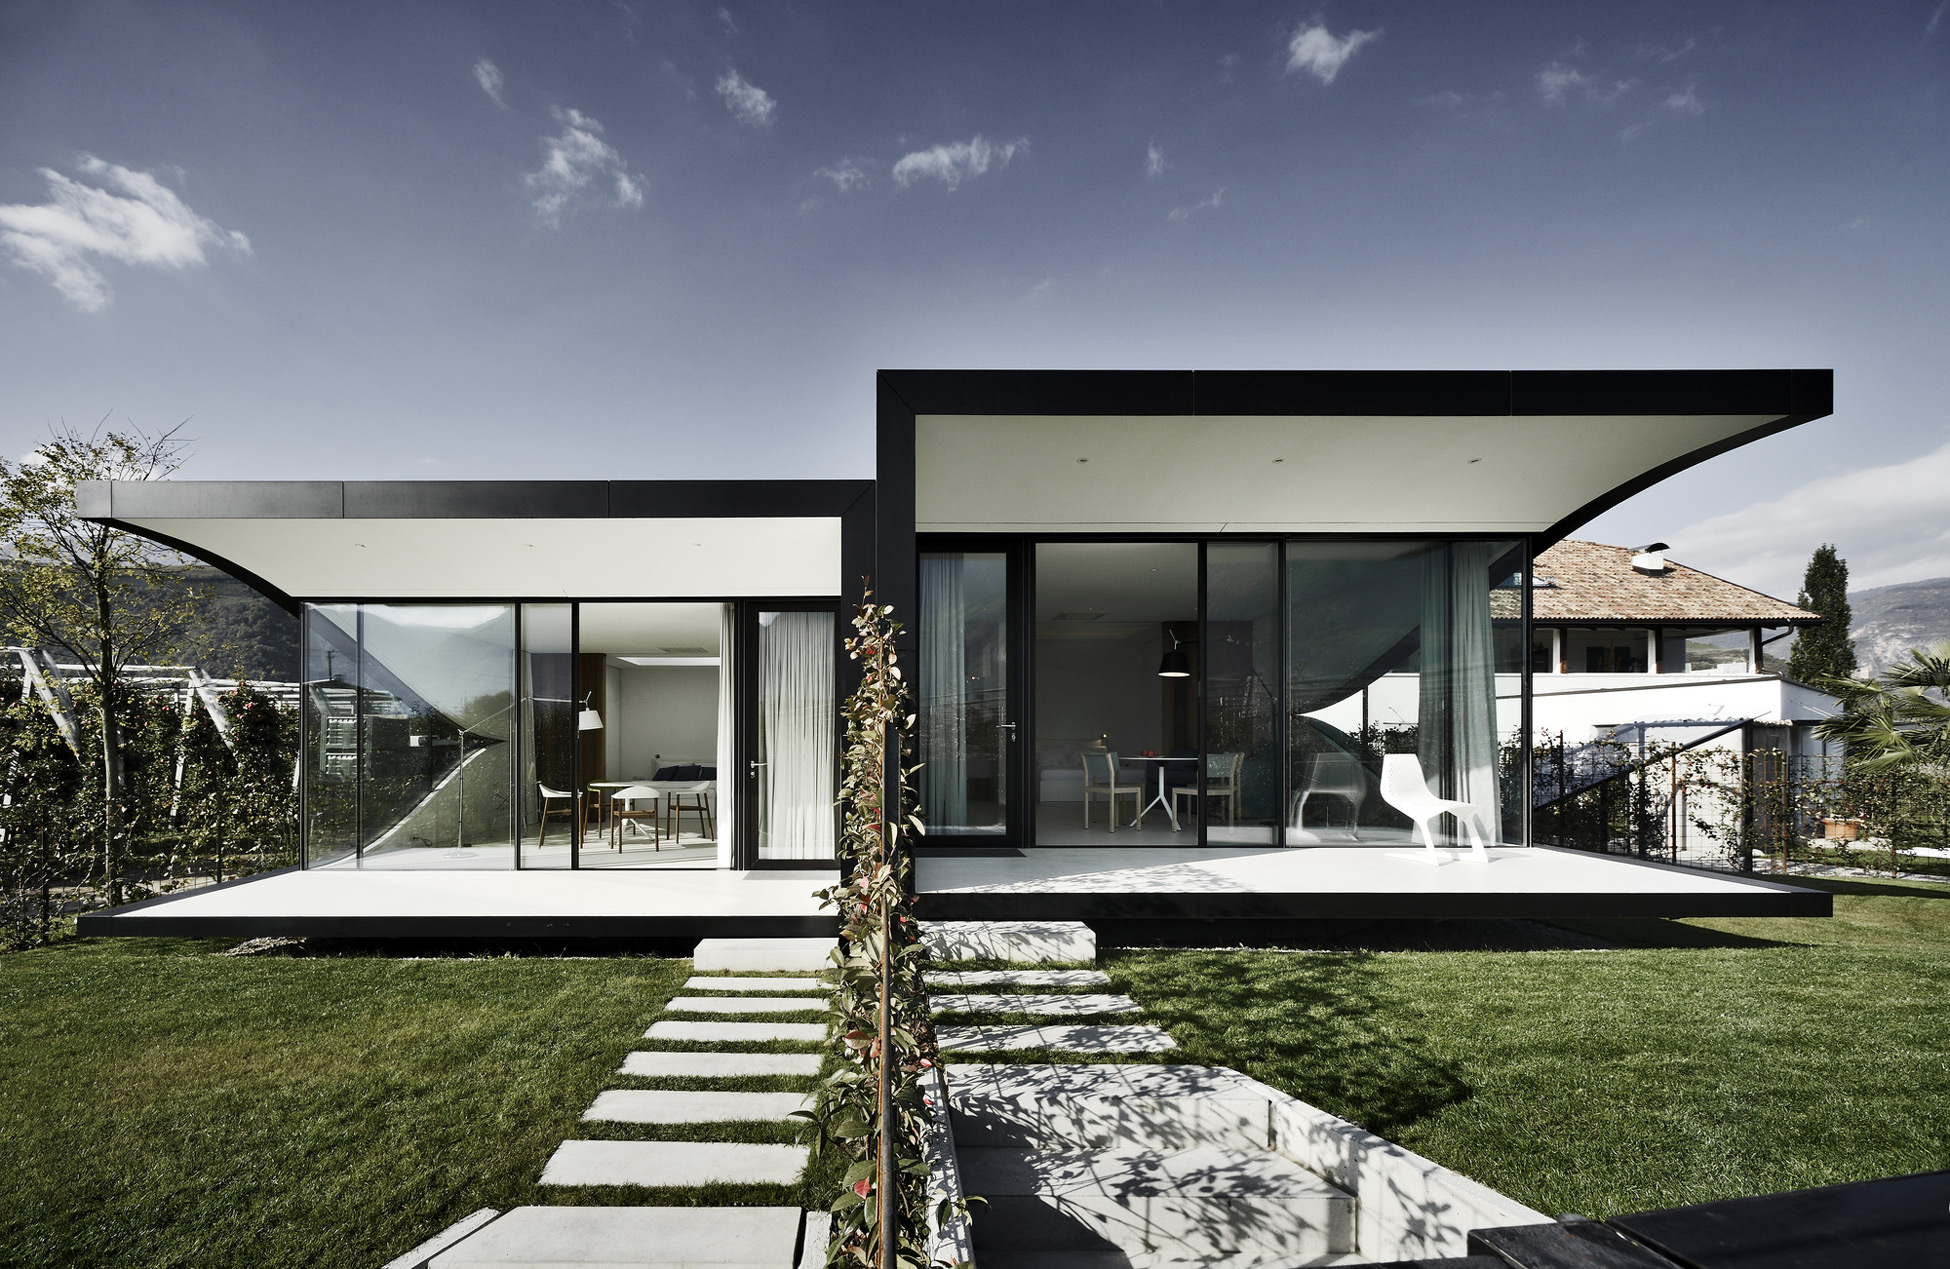 The Mirror Houses / Peter Pichler Architecture (5)